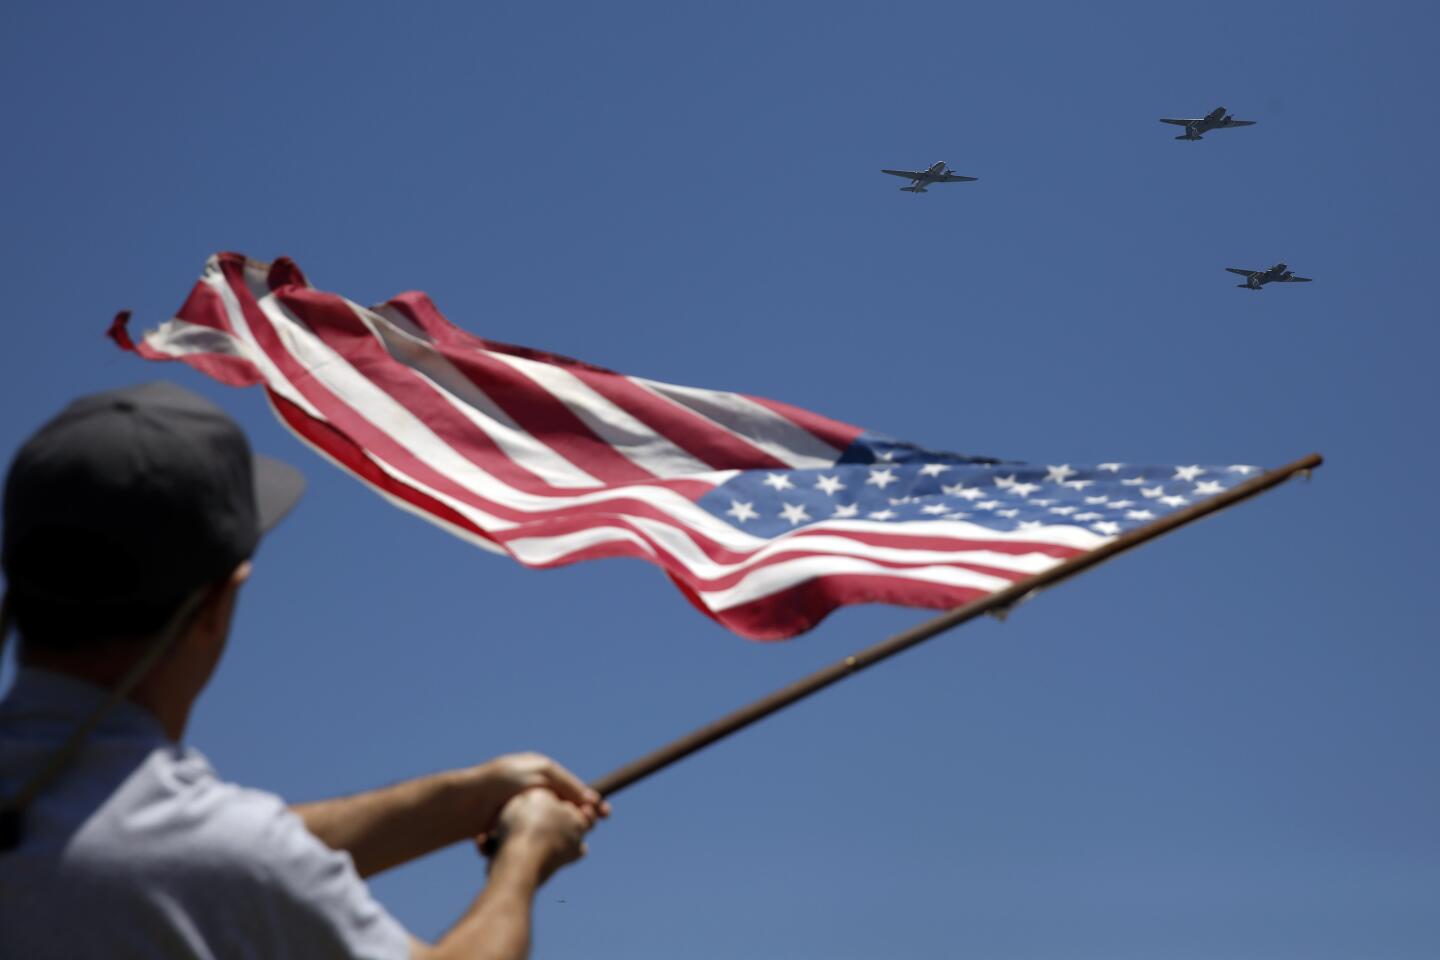 Michael Gentile waves a flag as historic warbirds fly over the Queen Mary on Monday in Long Beach.